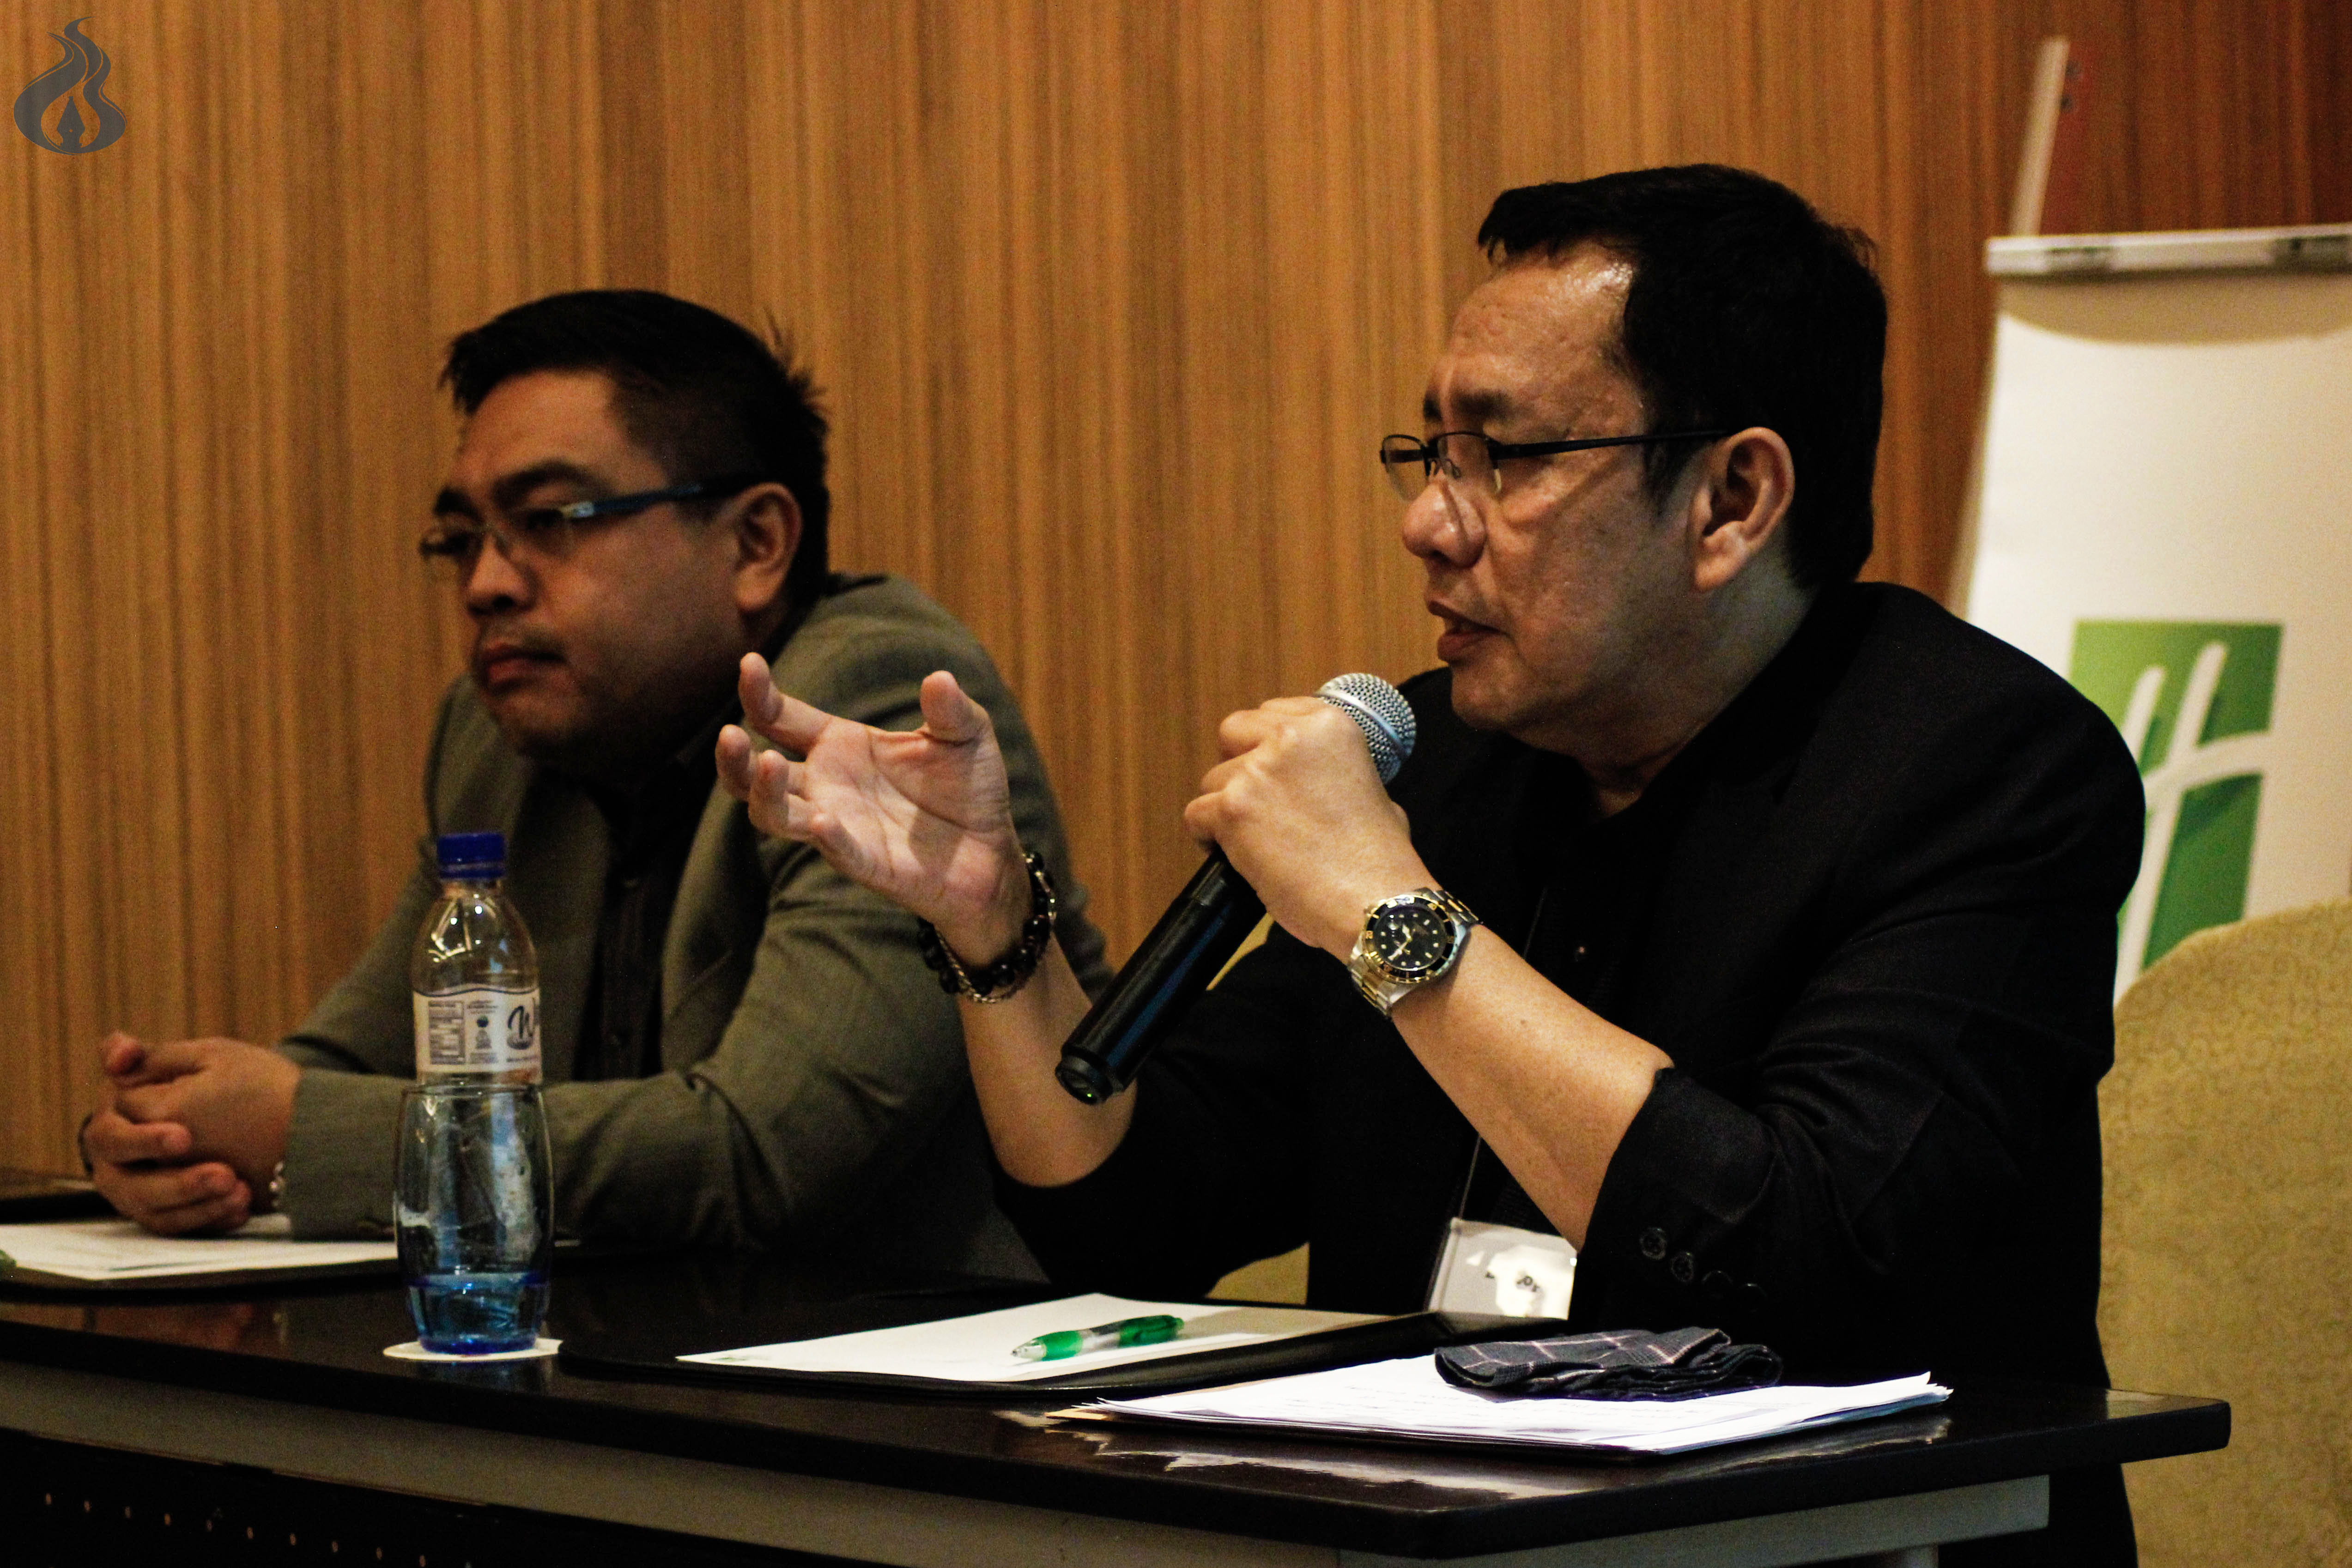 UST holds first economic briefing; Uncertainties, opportunities in PH discussed